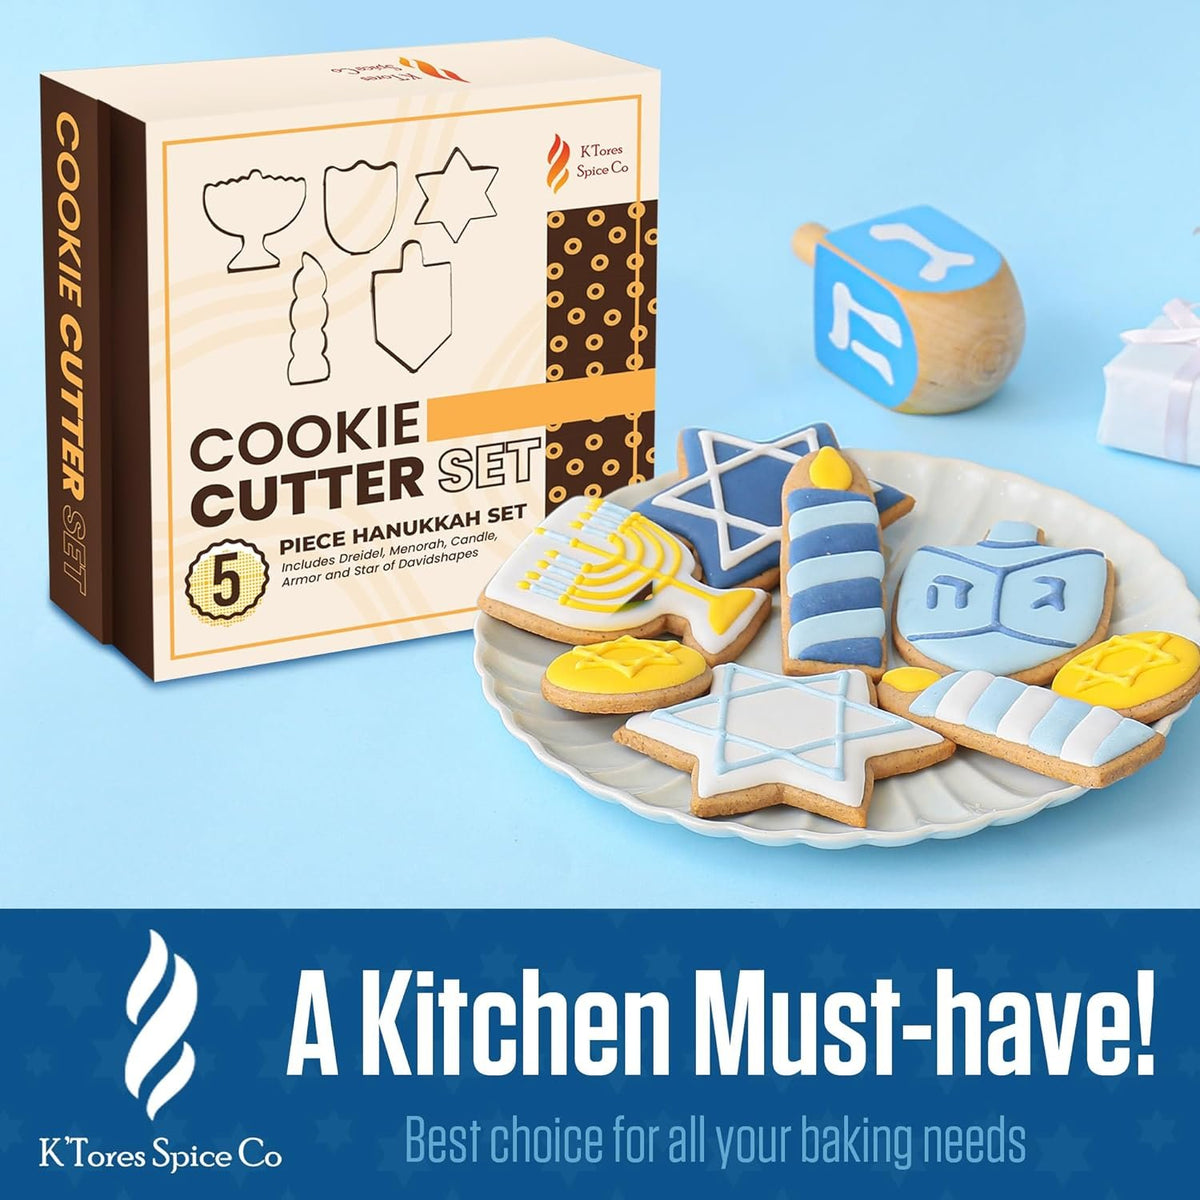 K'Tores Spice Co - Hebrew Jewish Cookie Cutters, Convenient Box - Food Safe Stainless Steel - Purim, Hanukkah and more